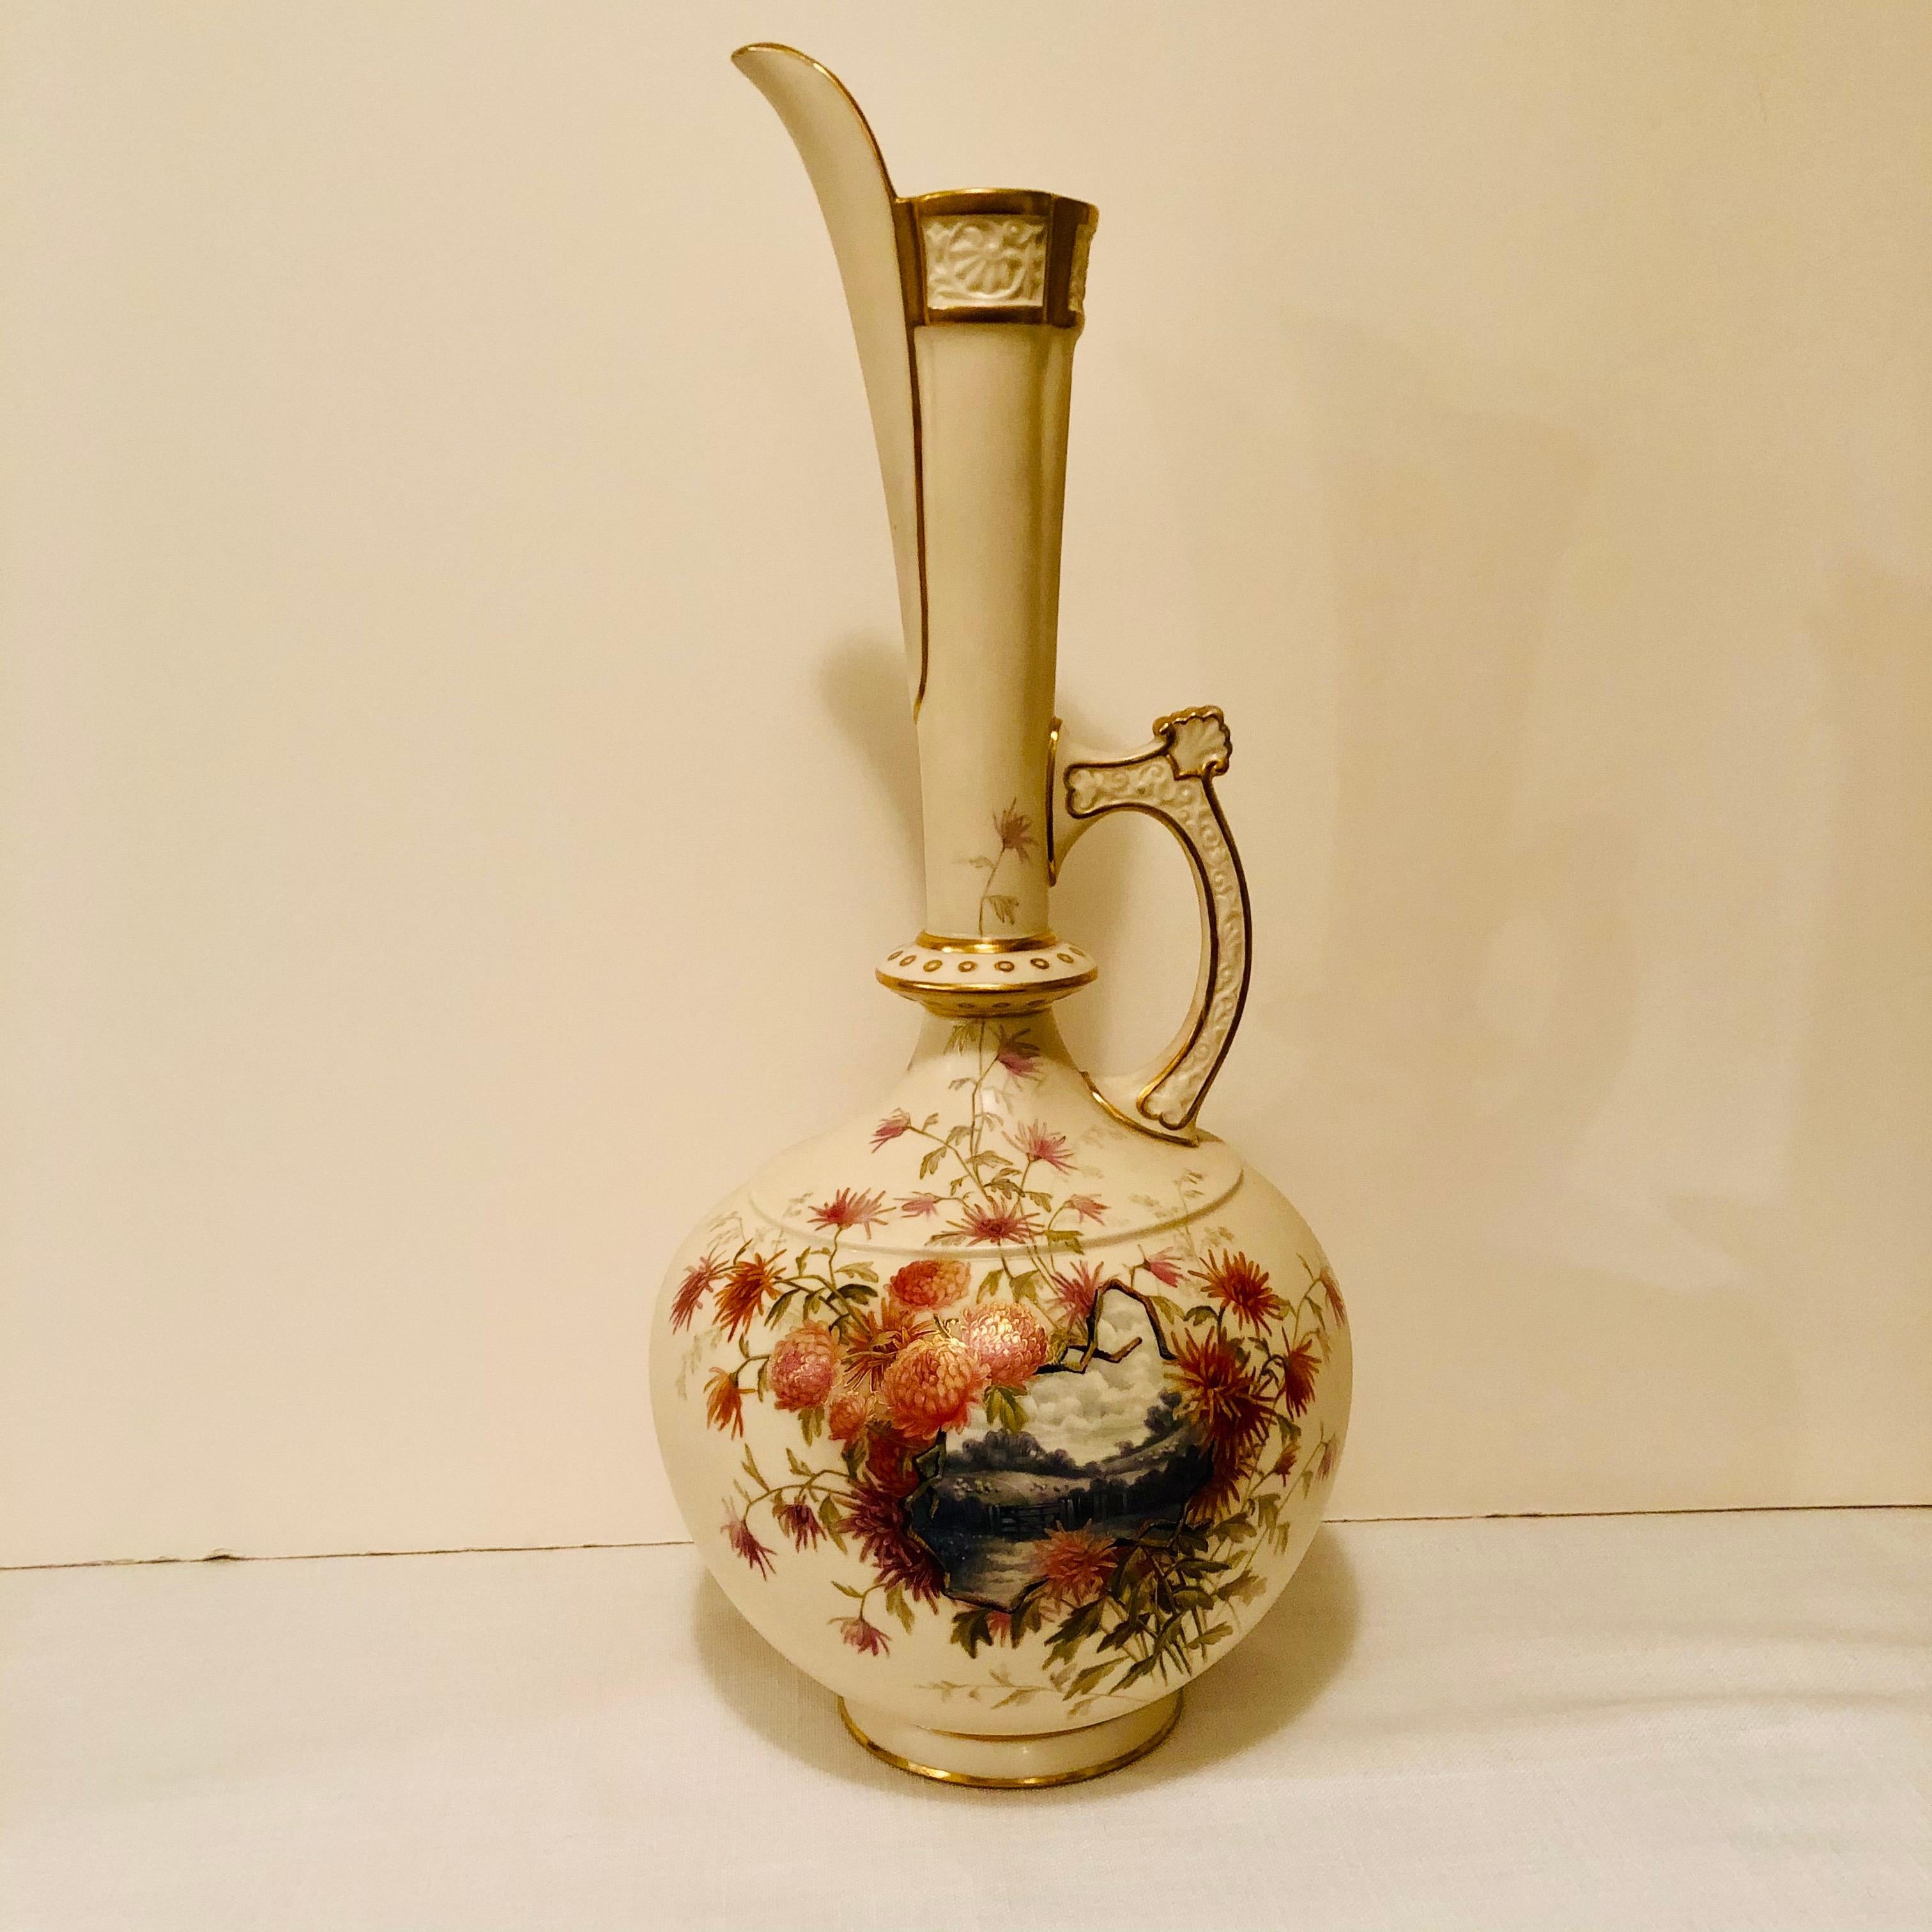 I would like to offer you this tall Royal Worcester vase or ewer, which is hand painted with a beautiful pastoral scene surrounded by gorgeous flower paintings. If you look at the scene closely, you can see the sheep in the background. The handle